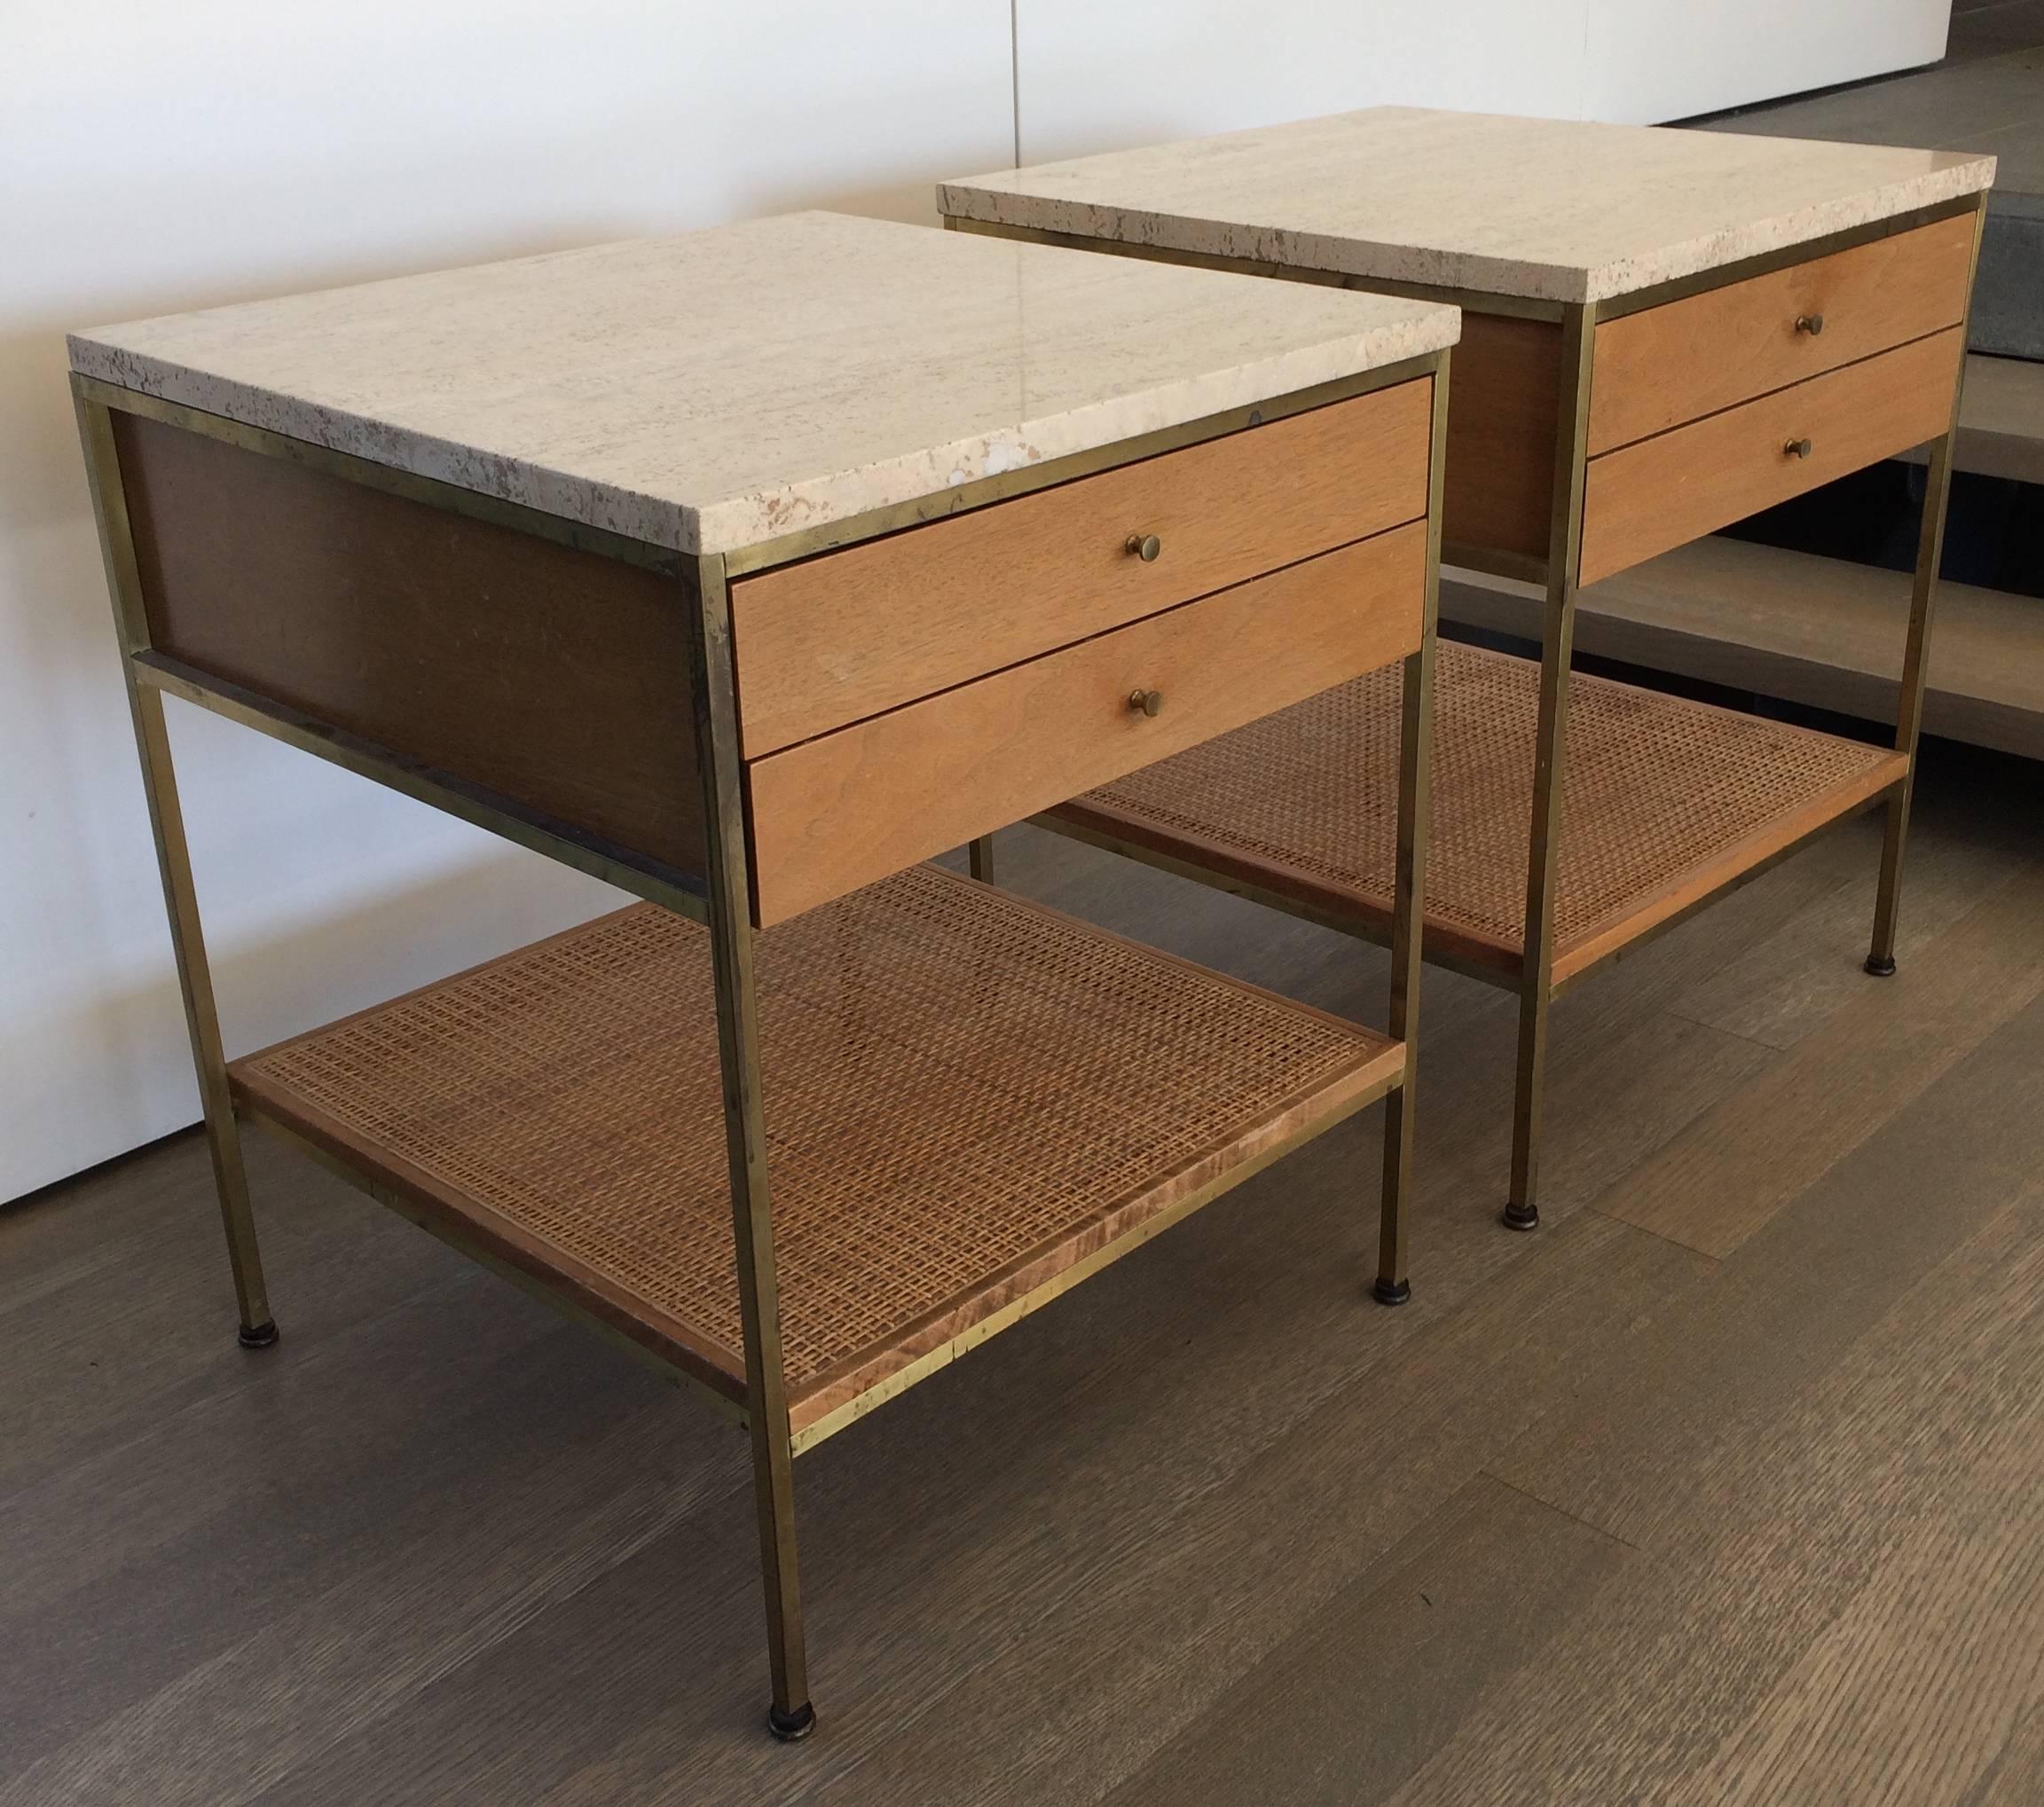 Pair of brass, blond mahogany two-drawer nightstands with travertine tops and lower caned shelf; designed by Paul McCobb for Calvin, retaining original maker tags. Great example of iconic Mid-Century design and materials.